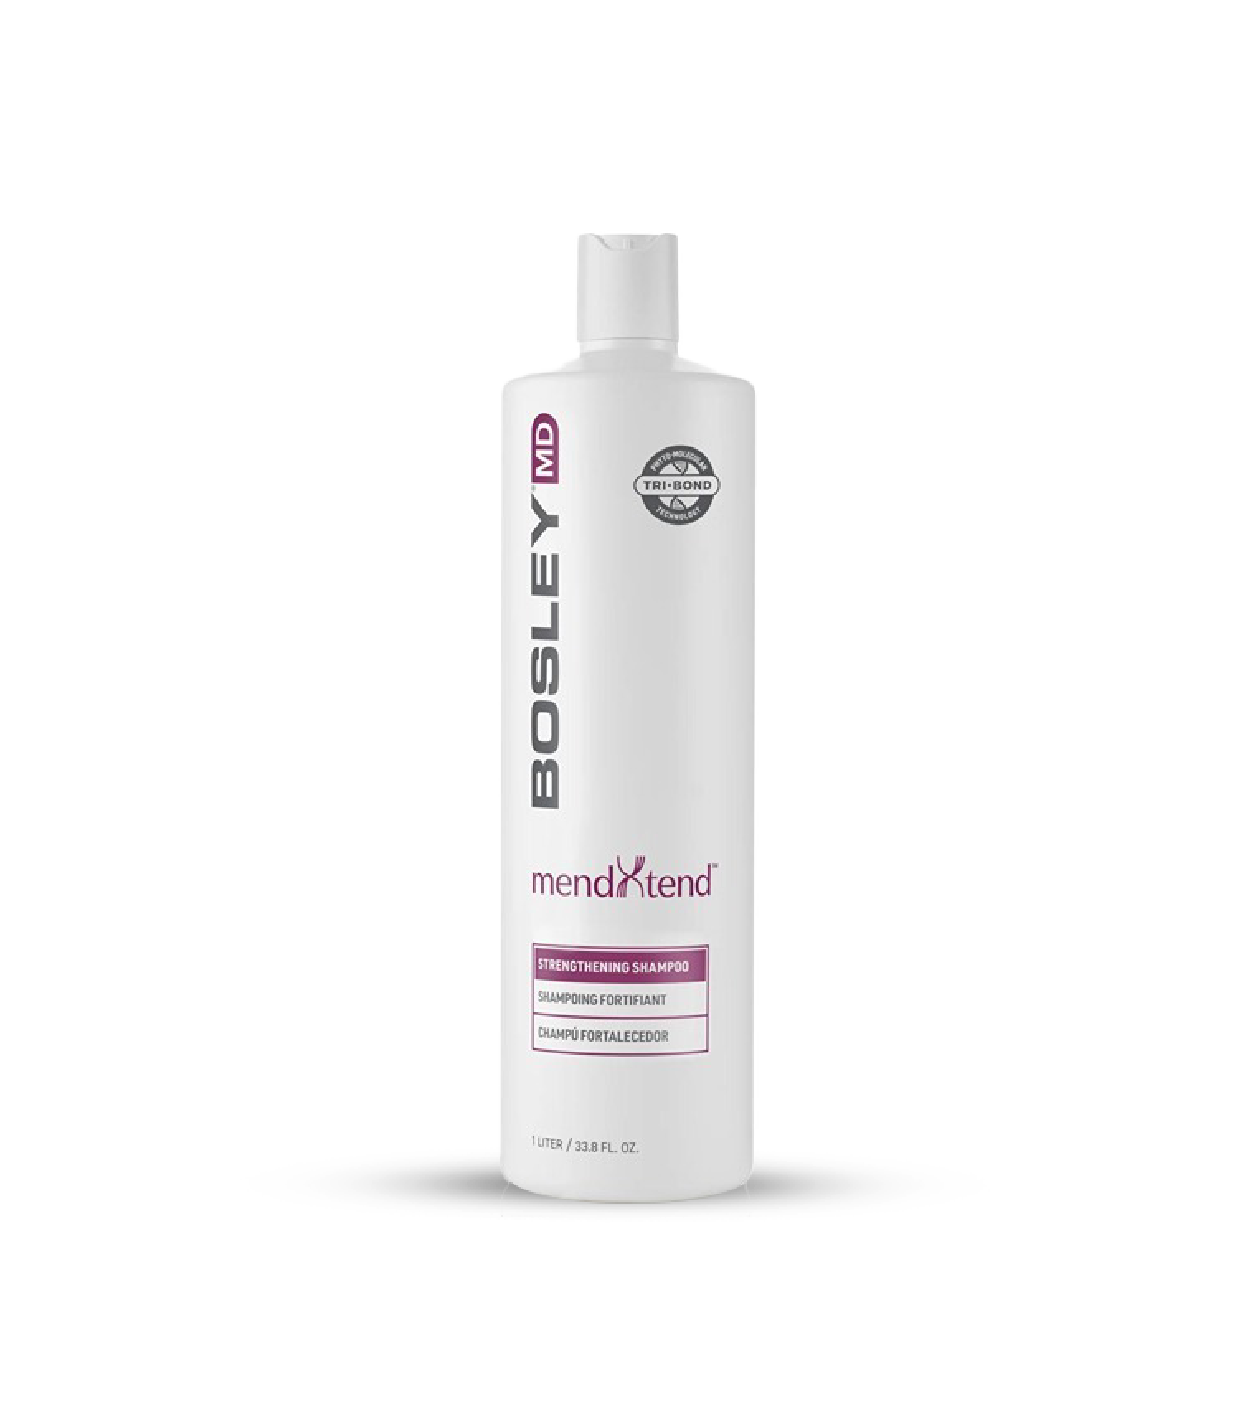 Coldcap.com_Haircare products_Bosley mendextend shampoo